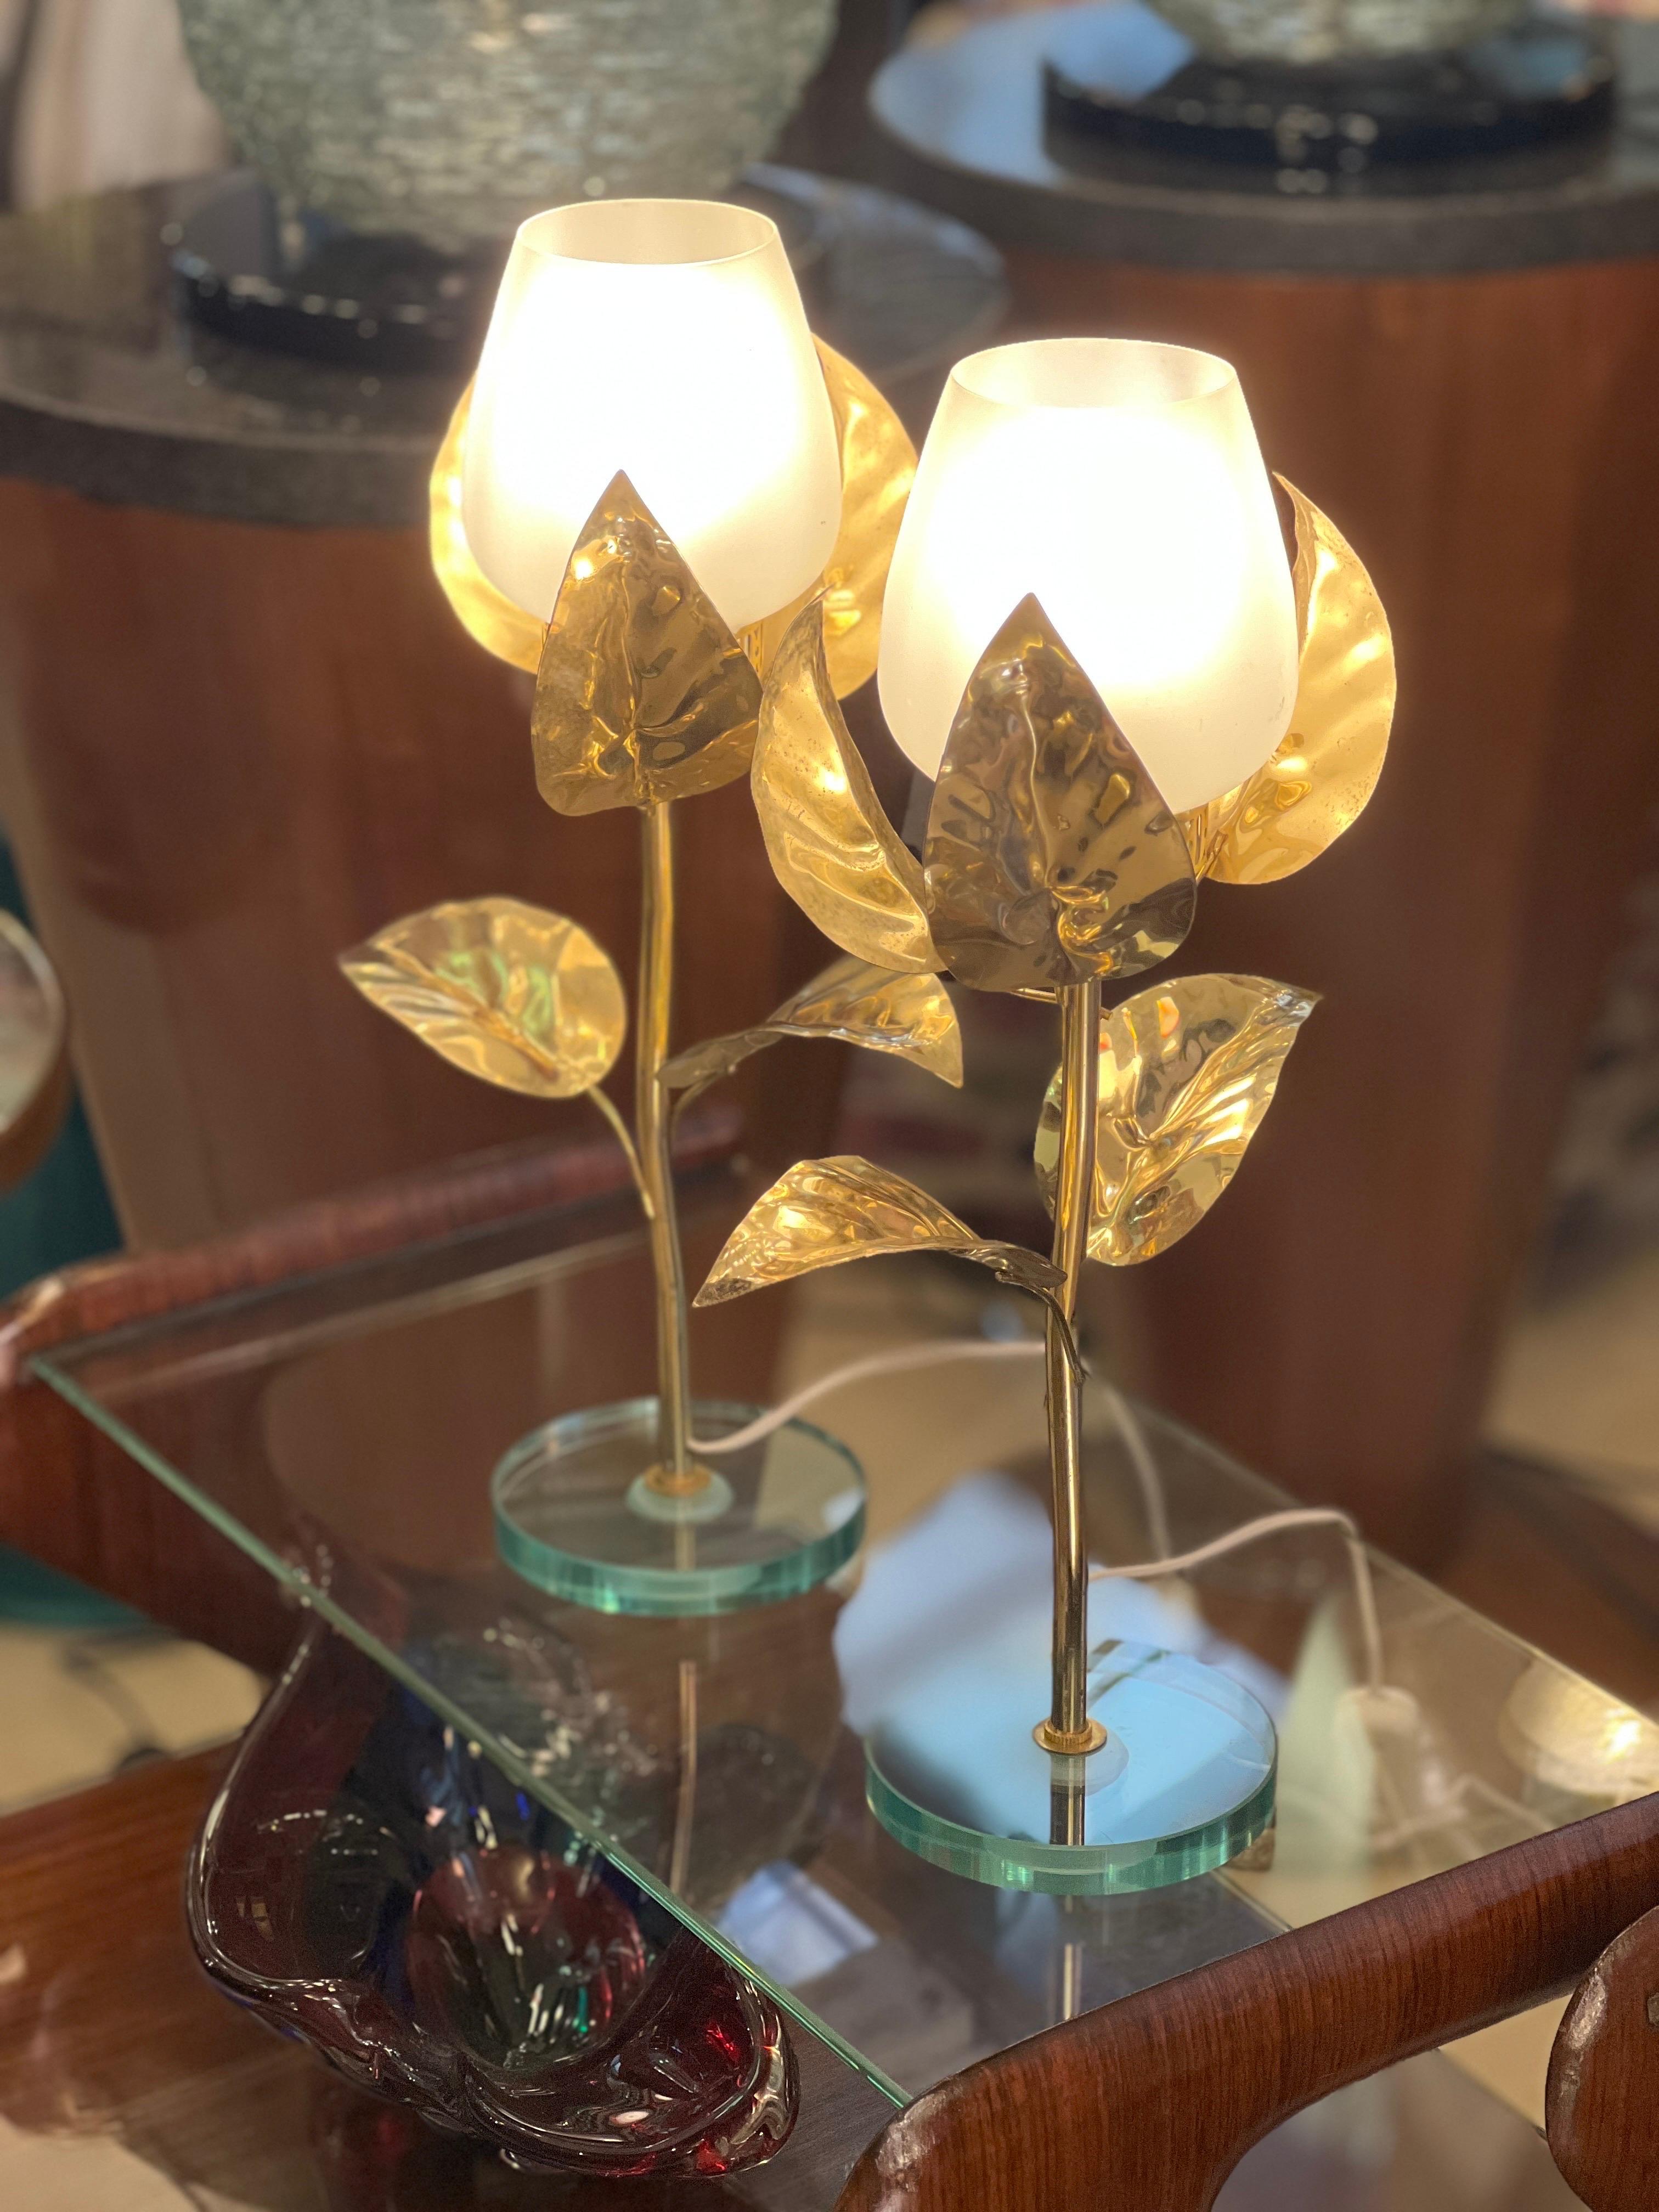  Pair of Mid-Century Flower-Shaped Lamps in White Murano Glass and Brass 1950s For Sale 10